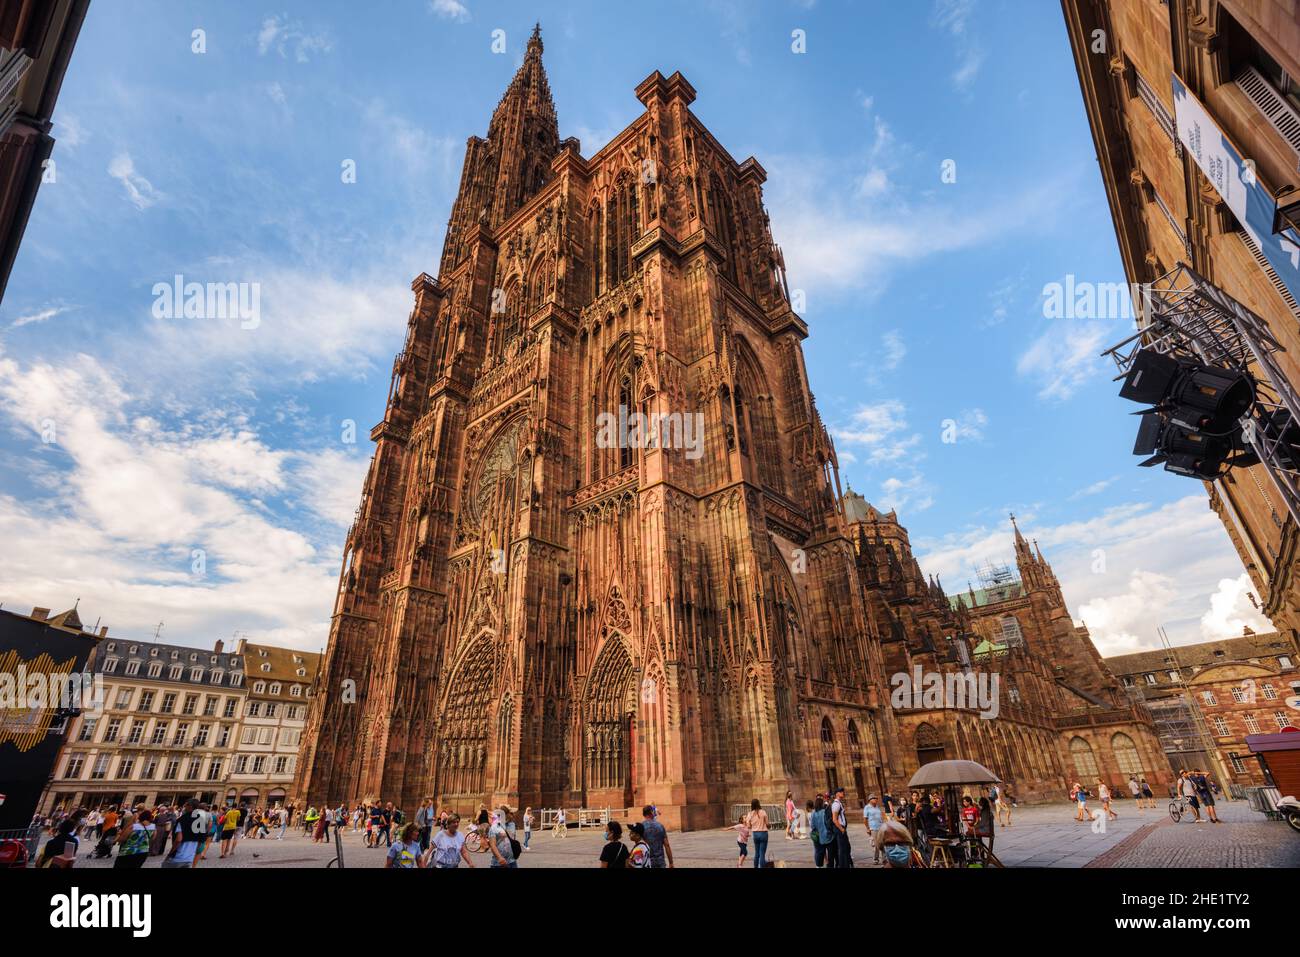 Strasbourg, France - 14 August 2020: The Strasbourg Cathedral is one of the biggest and most famous gothic cathedrals in France and the main landmark Stock Photo